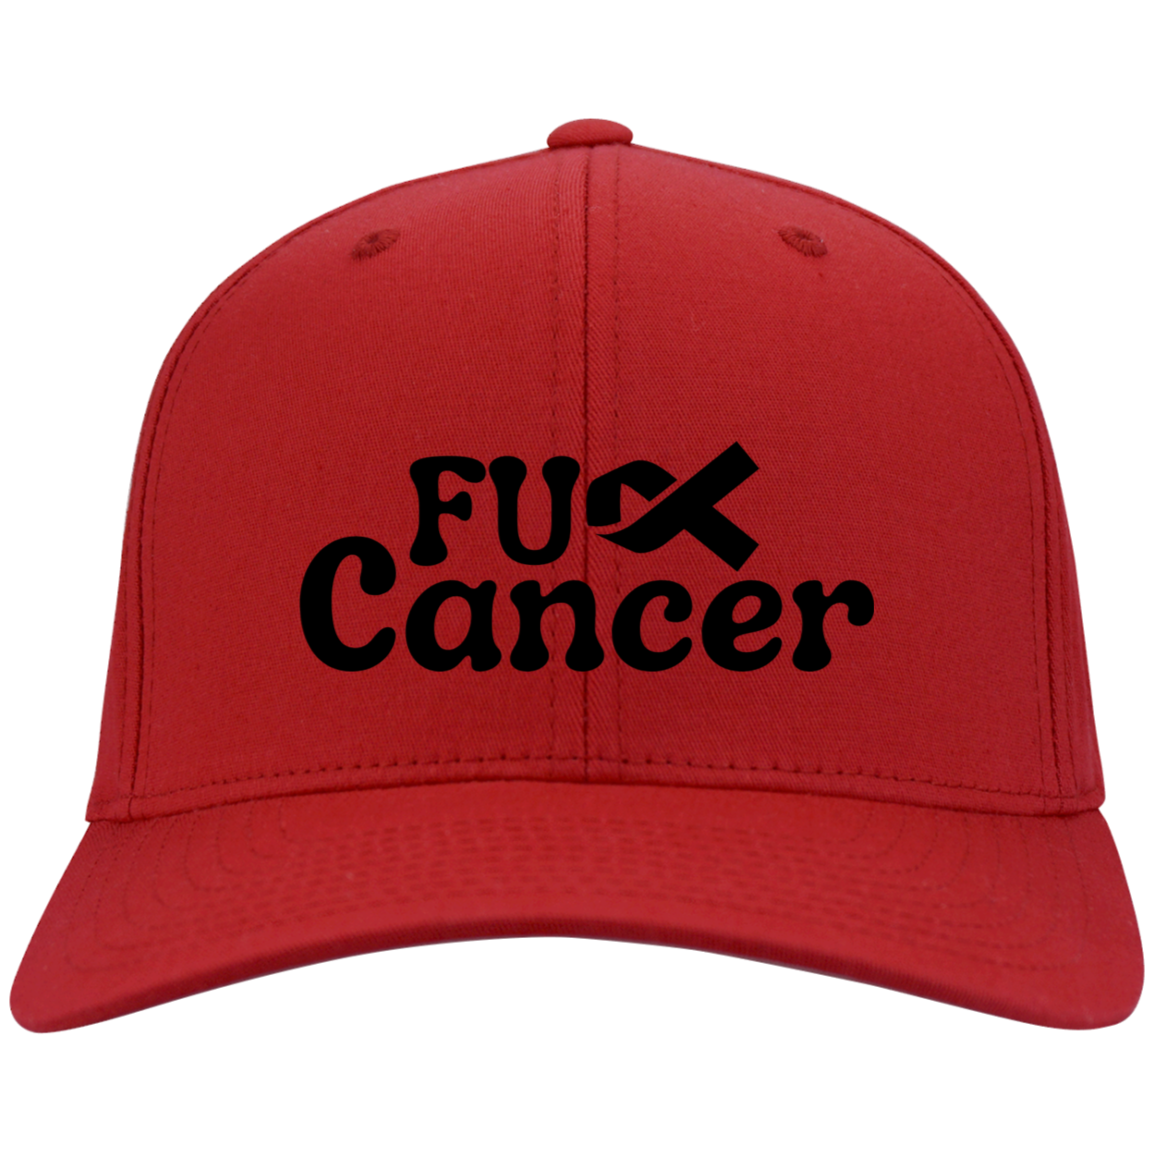 F Cancer Embroidered Flex Fit Twill Baseball Cap